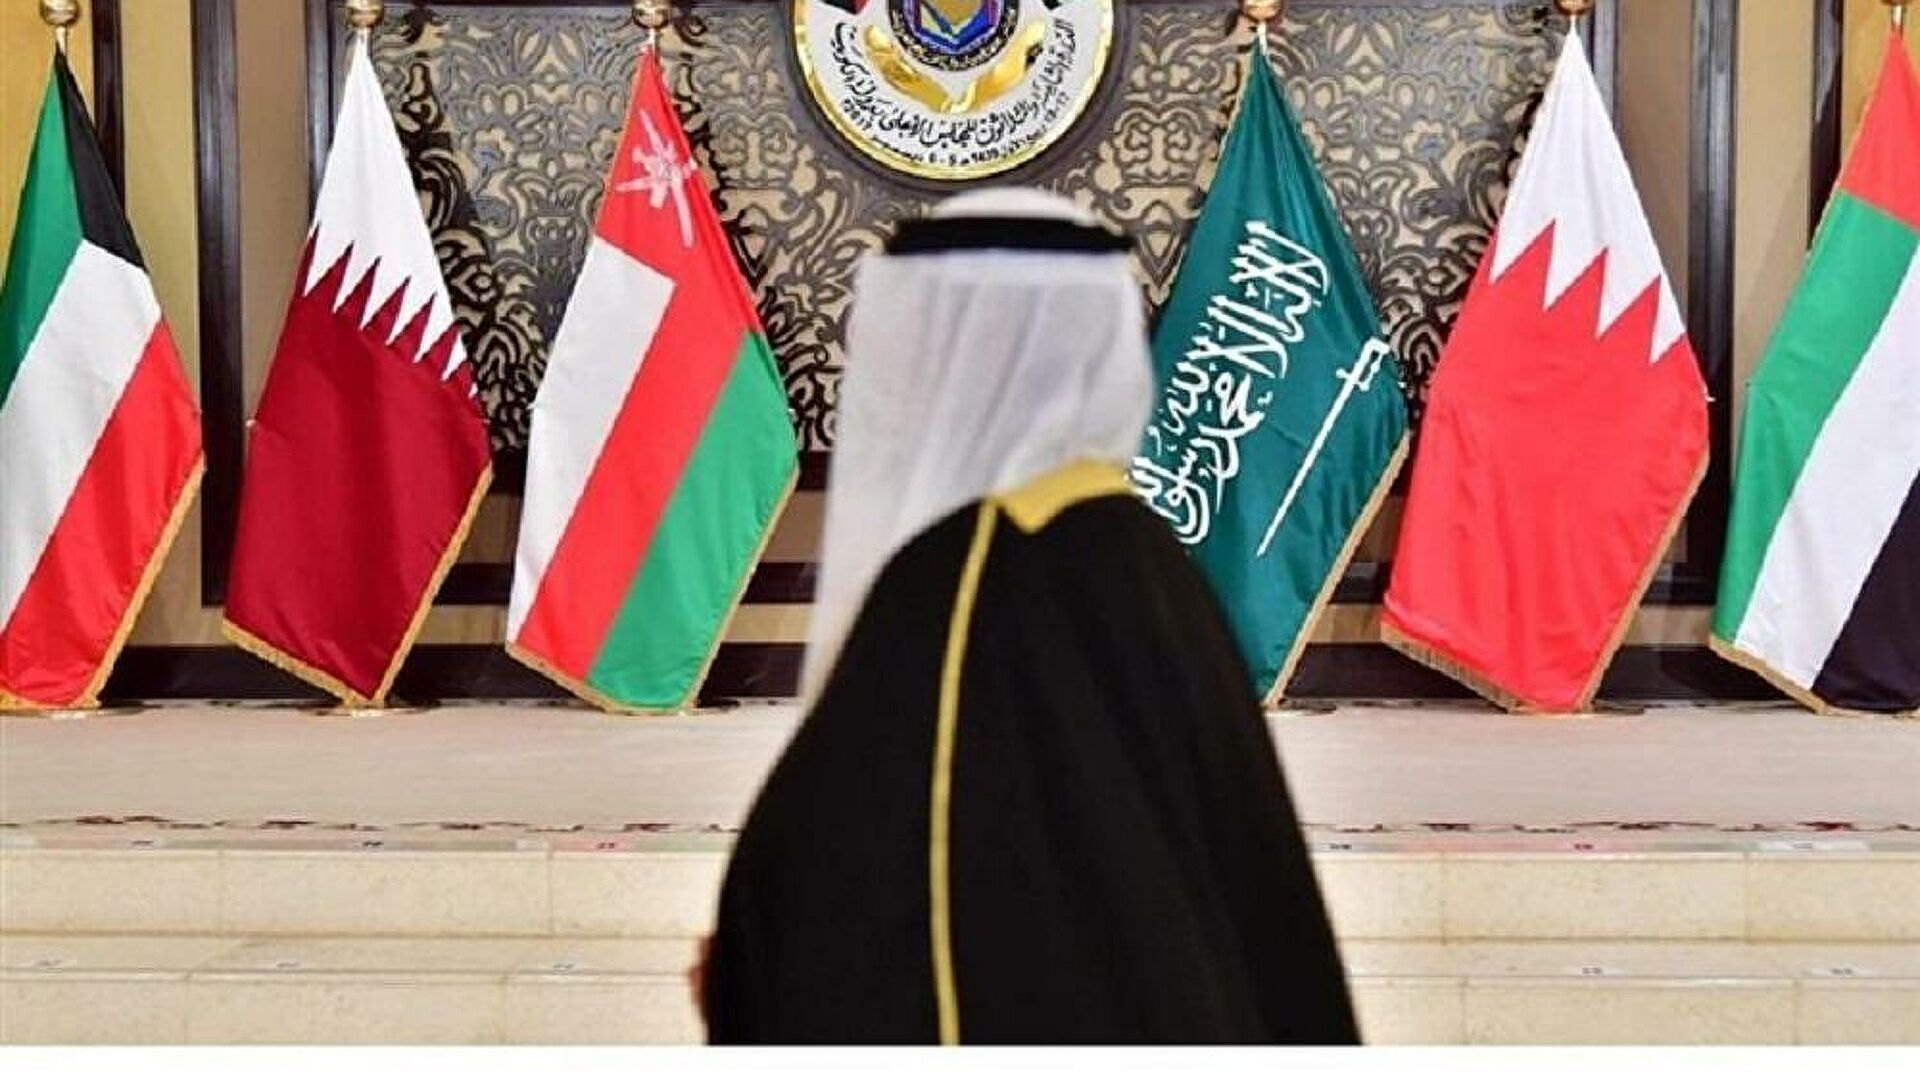 The interests of the Arab countries and the Vienna talks